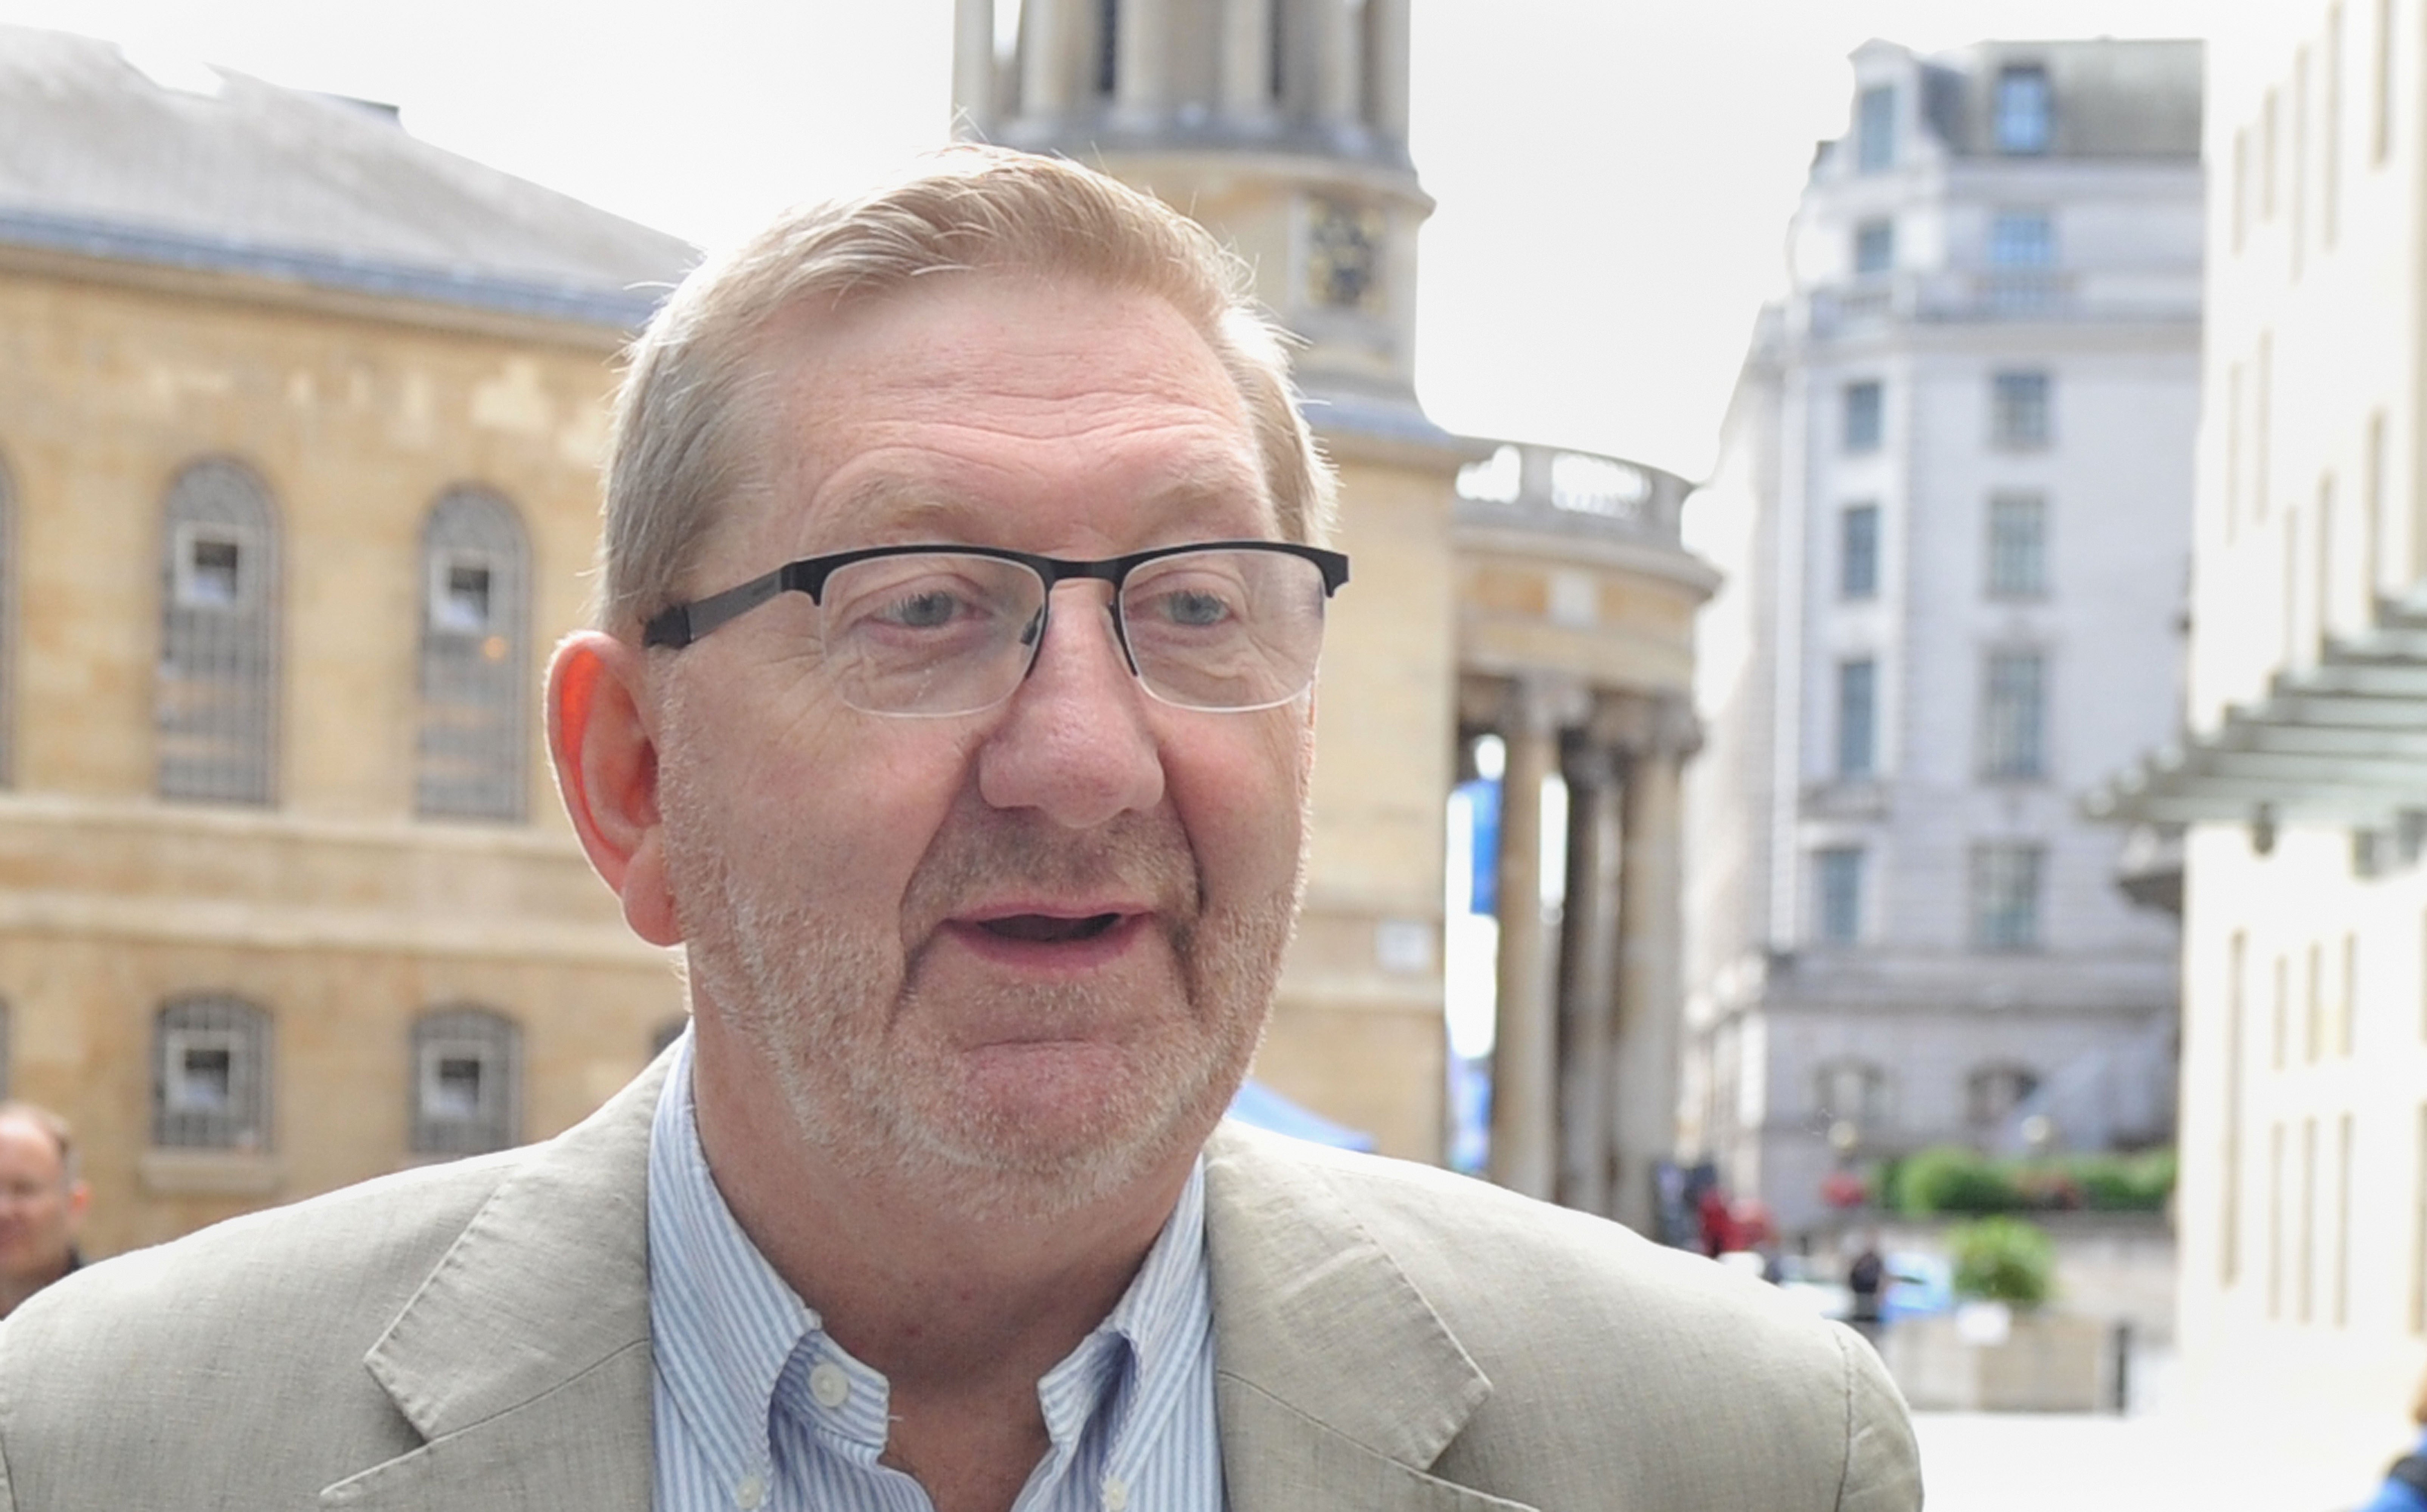 Former trade union leader Len McCluskey says Labour has stagnated in Scotland (Ben Stevens/PA)